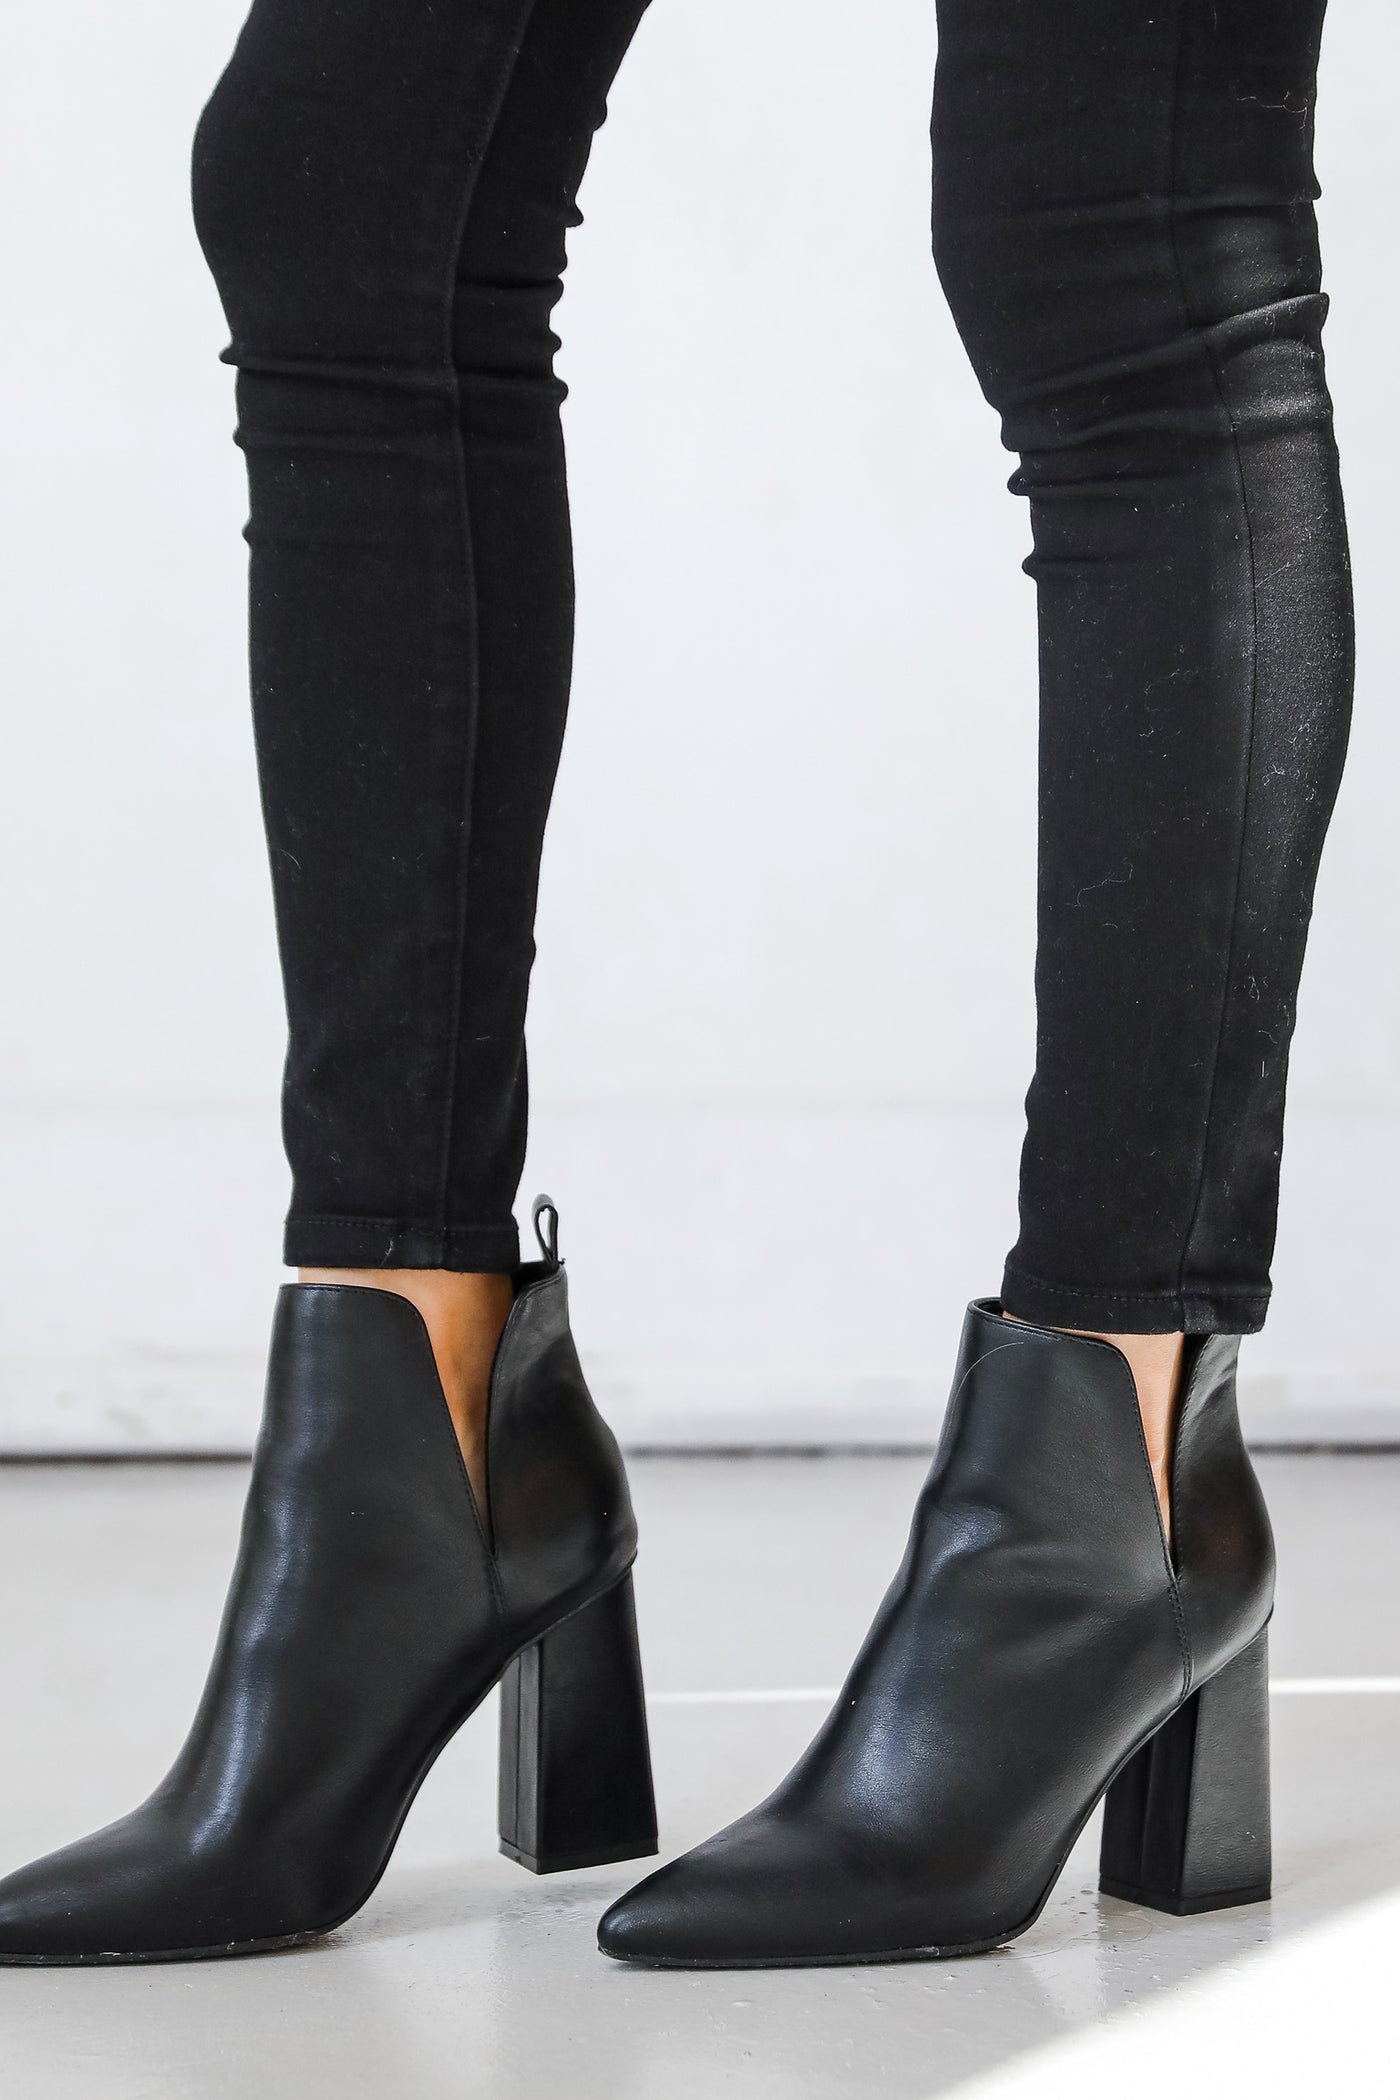 Ankle Booties in black side view